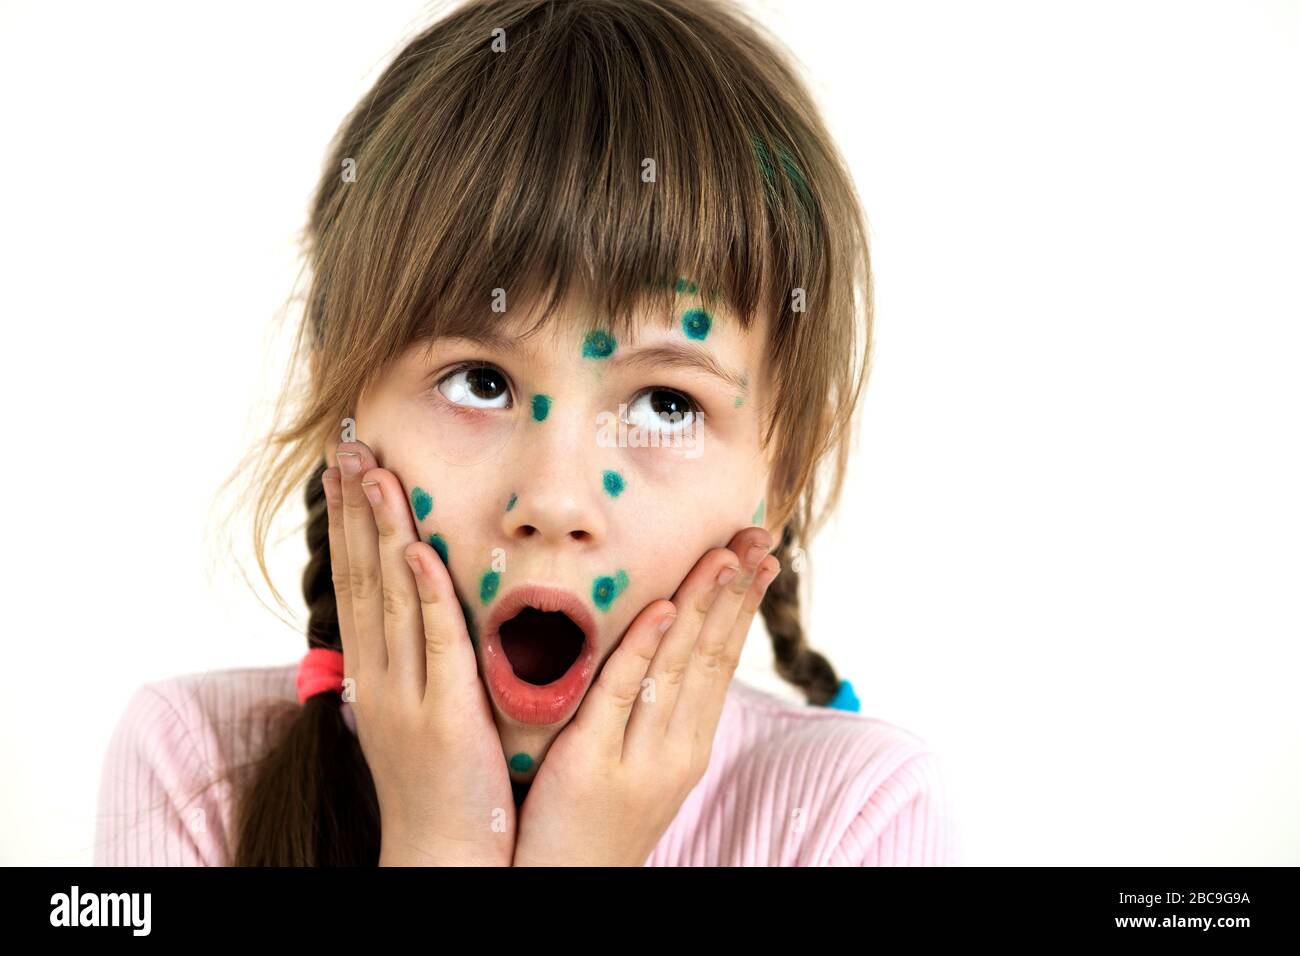 Child girl covered with green rashes on face ill with chickenpox, measles or rubella virus. Stock Photo